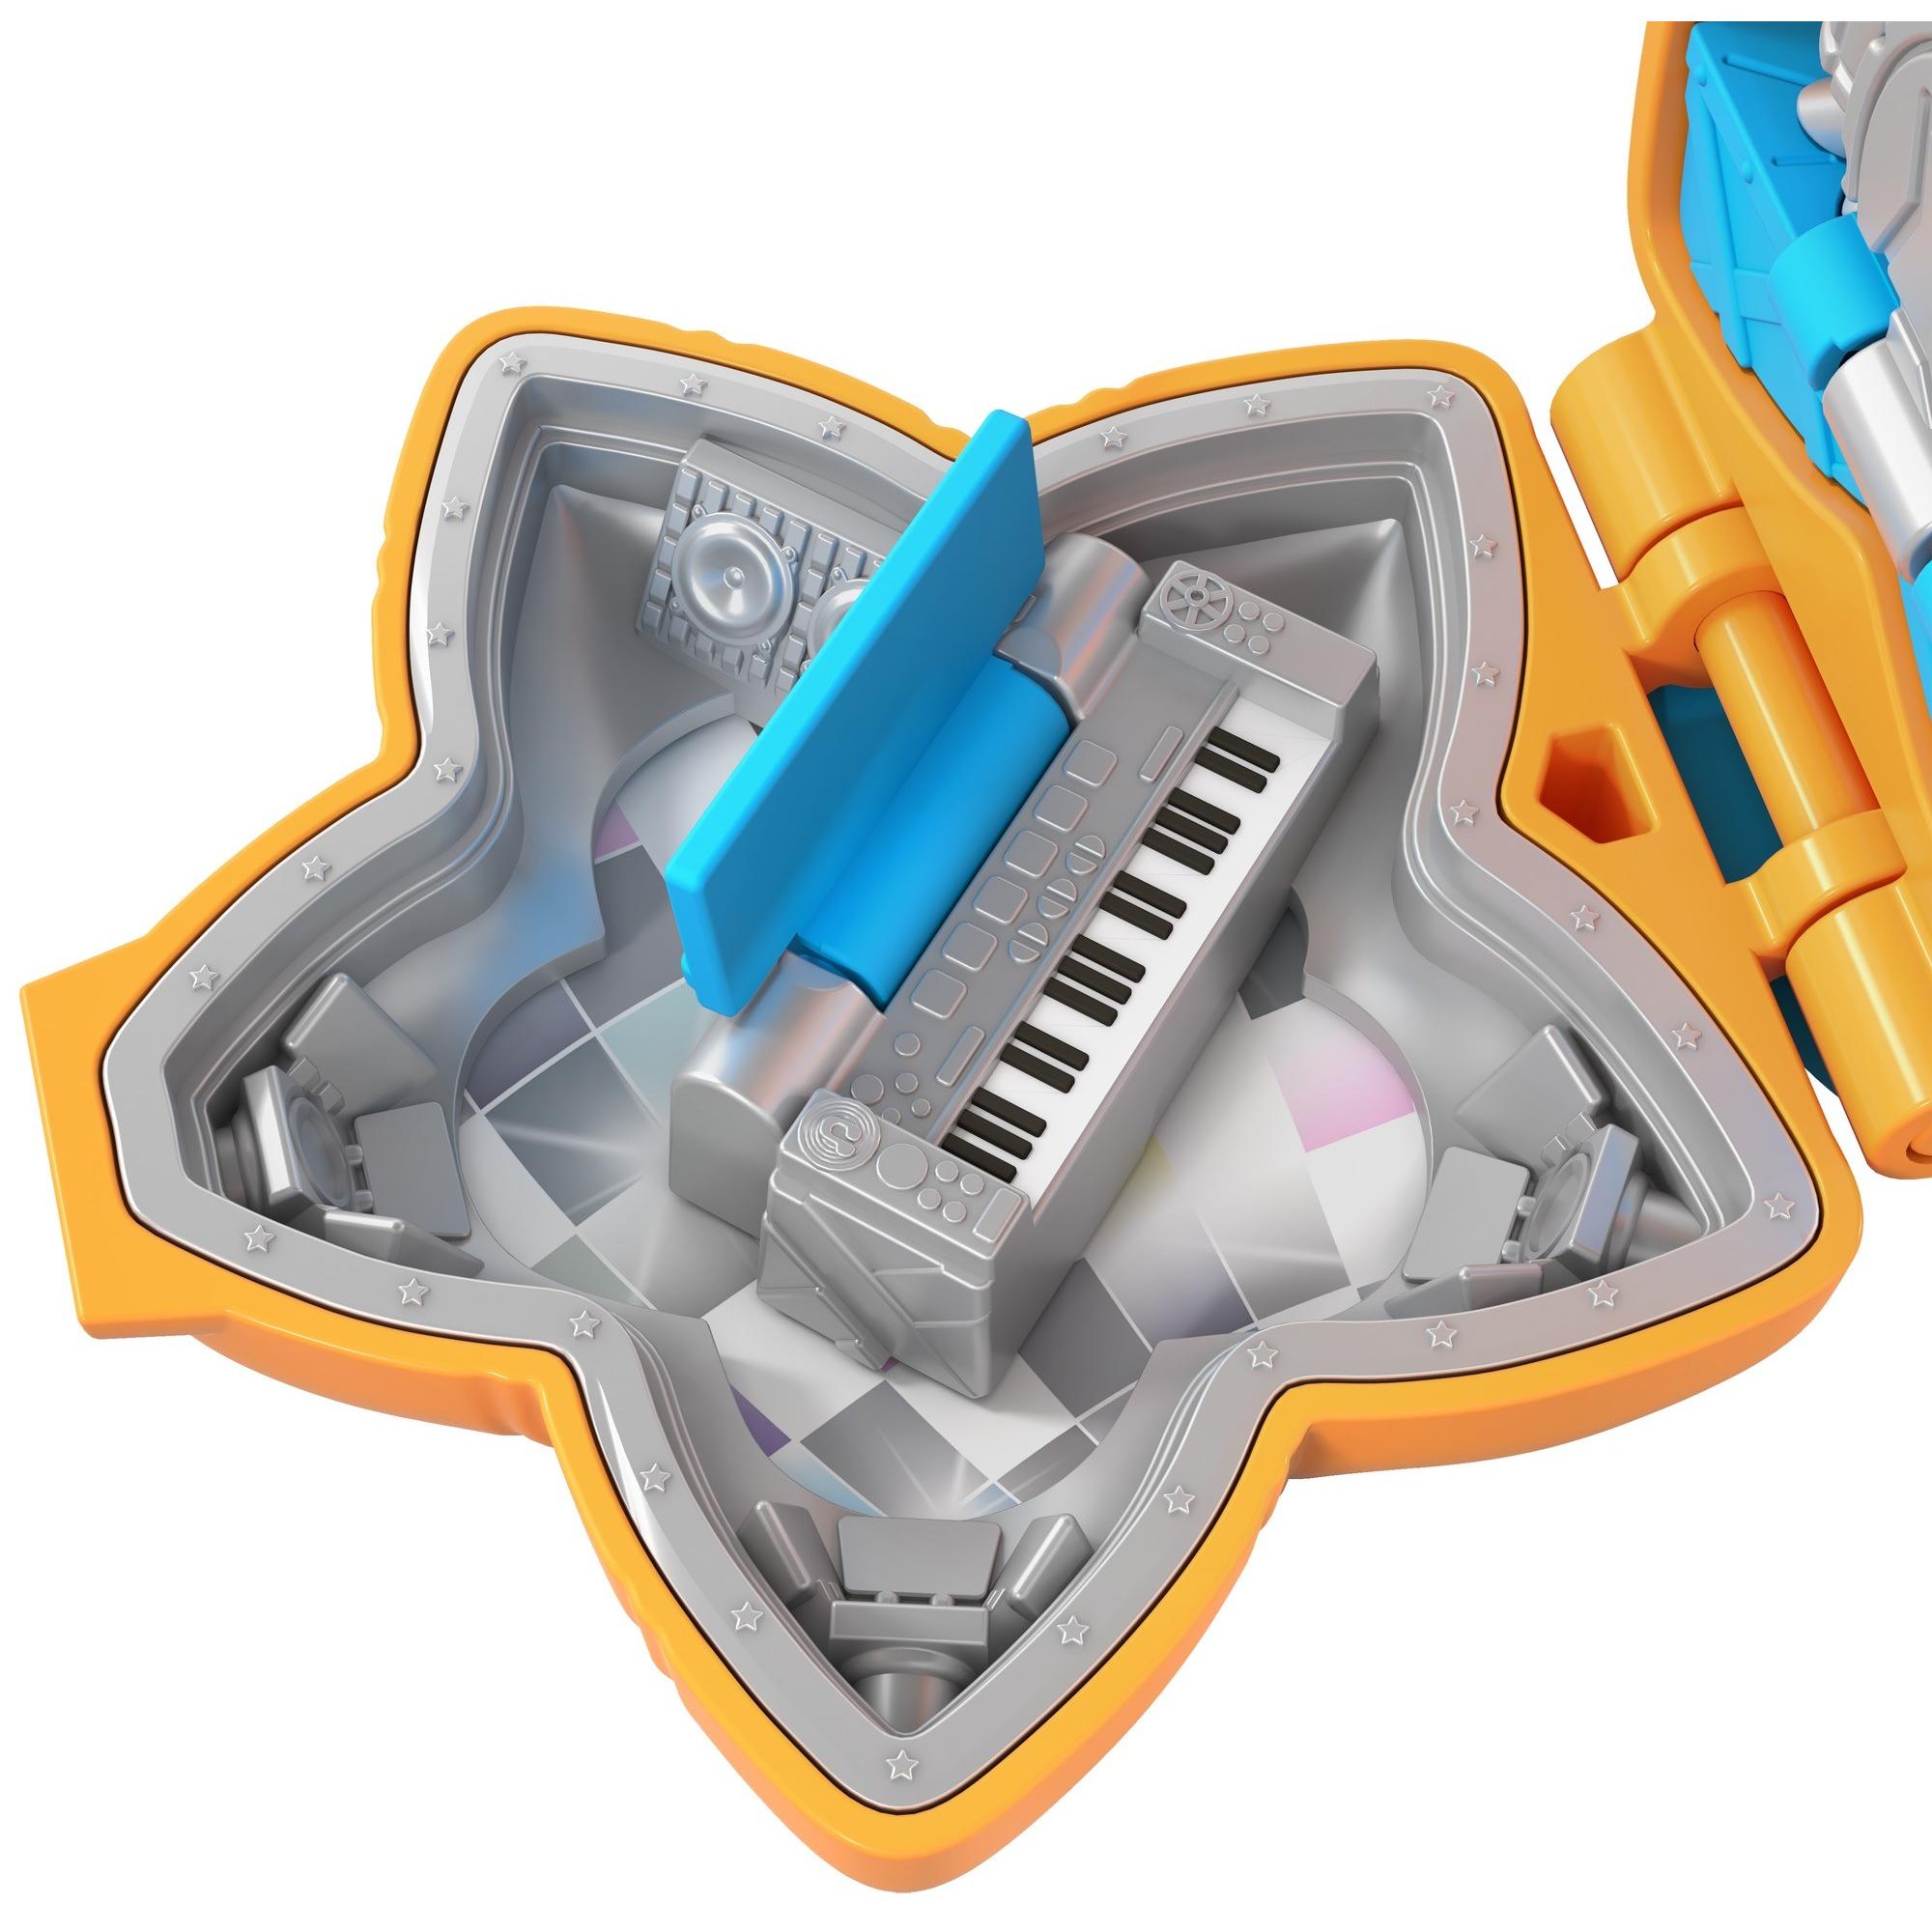 Polly Pocket Tiny Pocket Places Teeny Boppin' Concert Music Compact with Doll - image 5 of 7